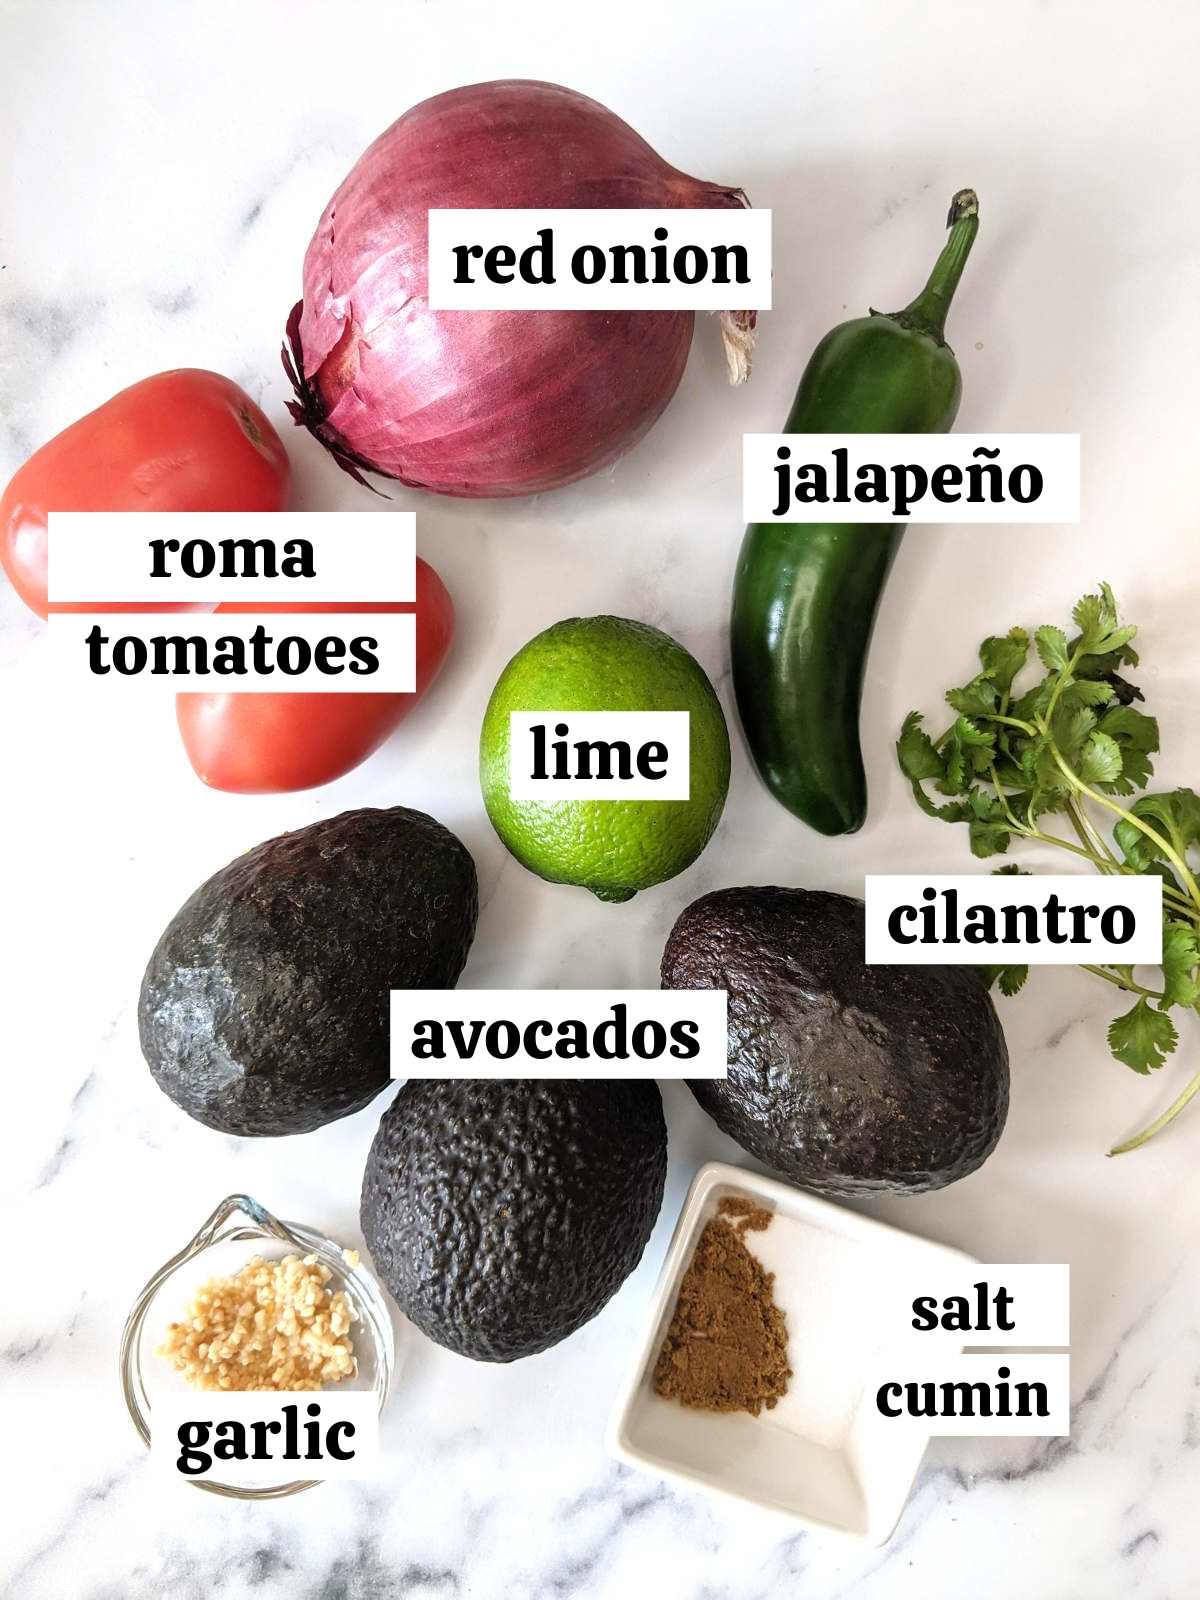 Ingredients of vegan guacamole laid out and labeled.